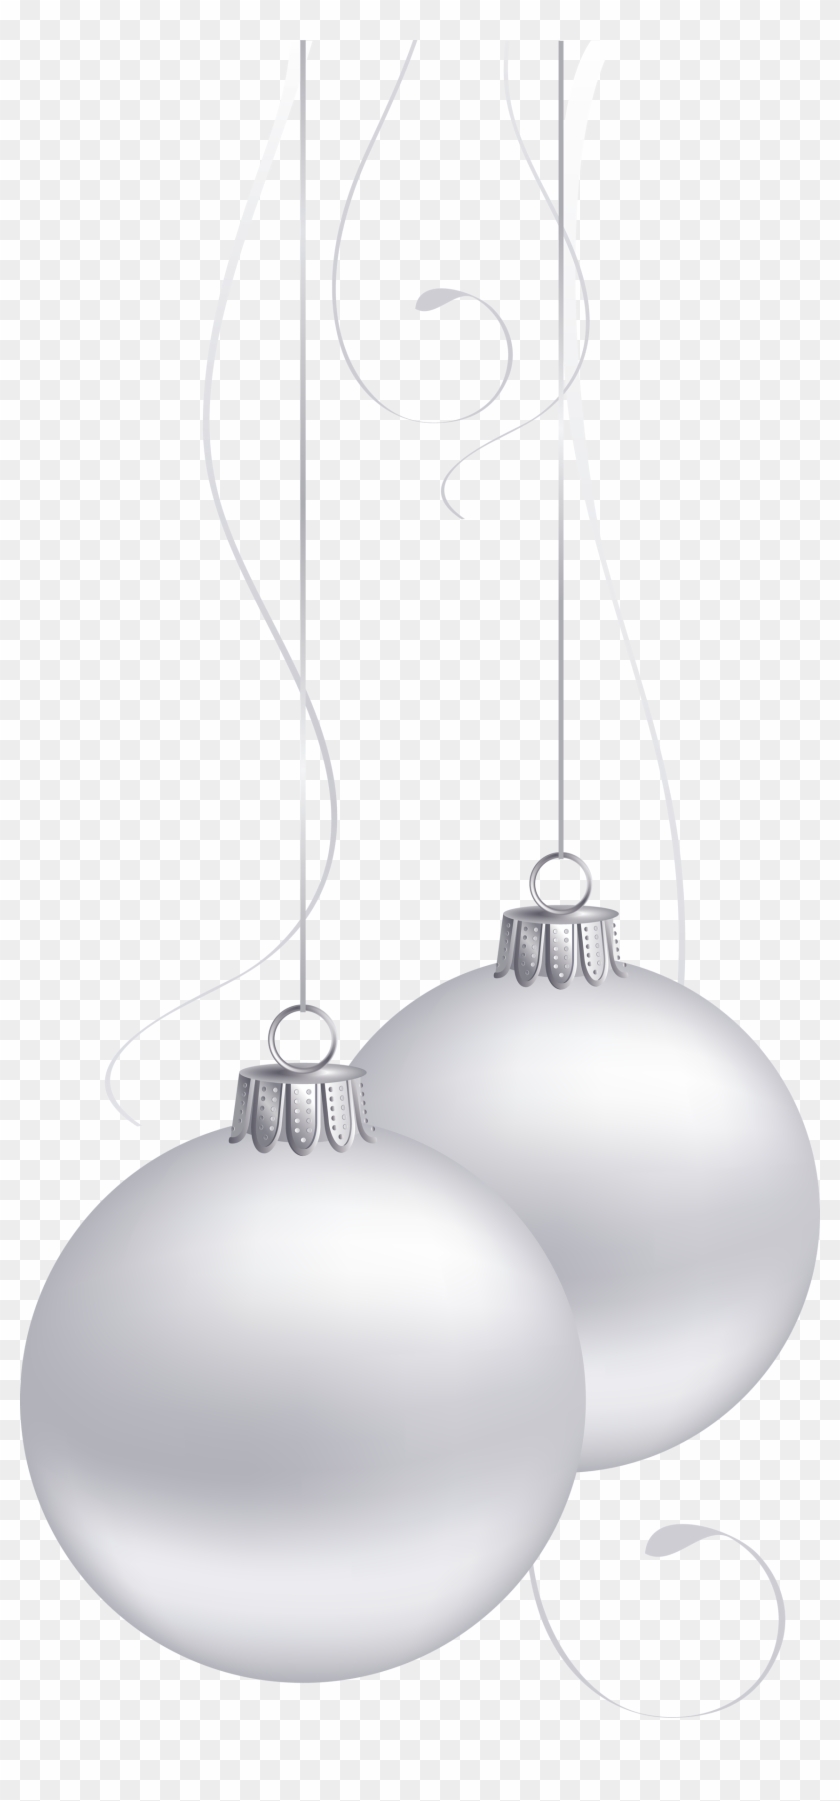 Christmas Png Image - Christmas Ball Clipart White Png Transparent Png #141794